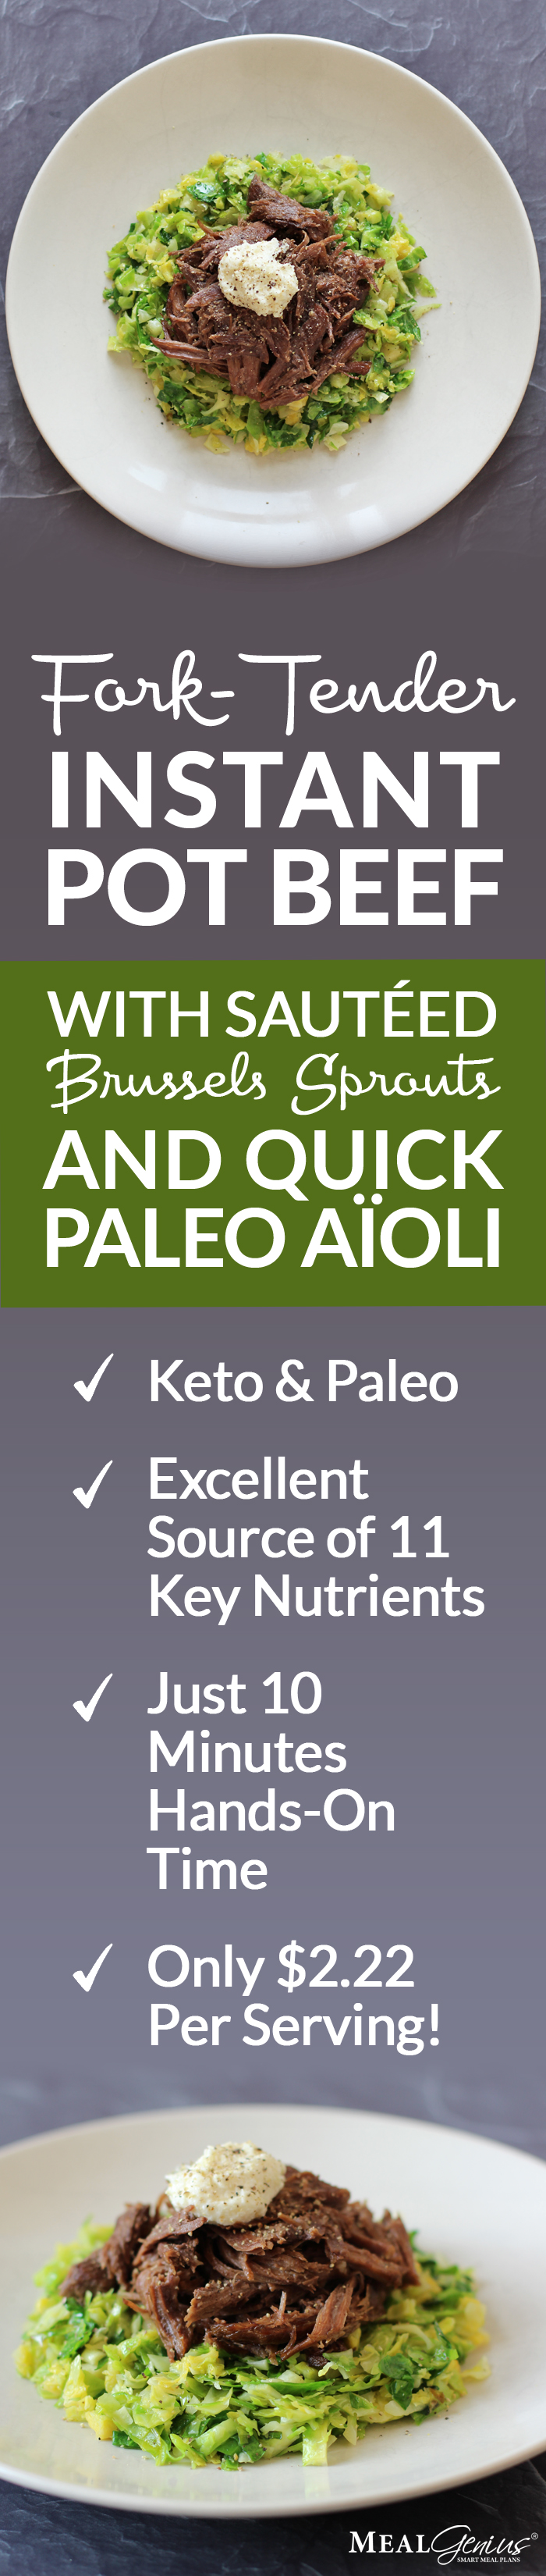 Instant Pot Beef Brussels Sprouts & Paleo Aioli - Meal Genius